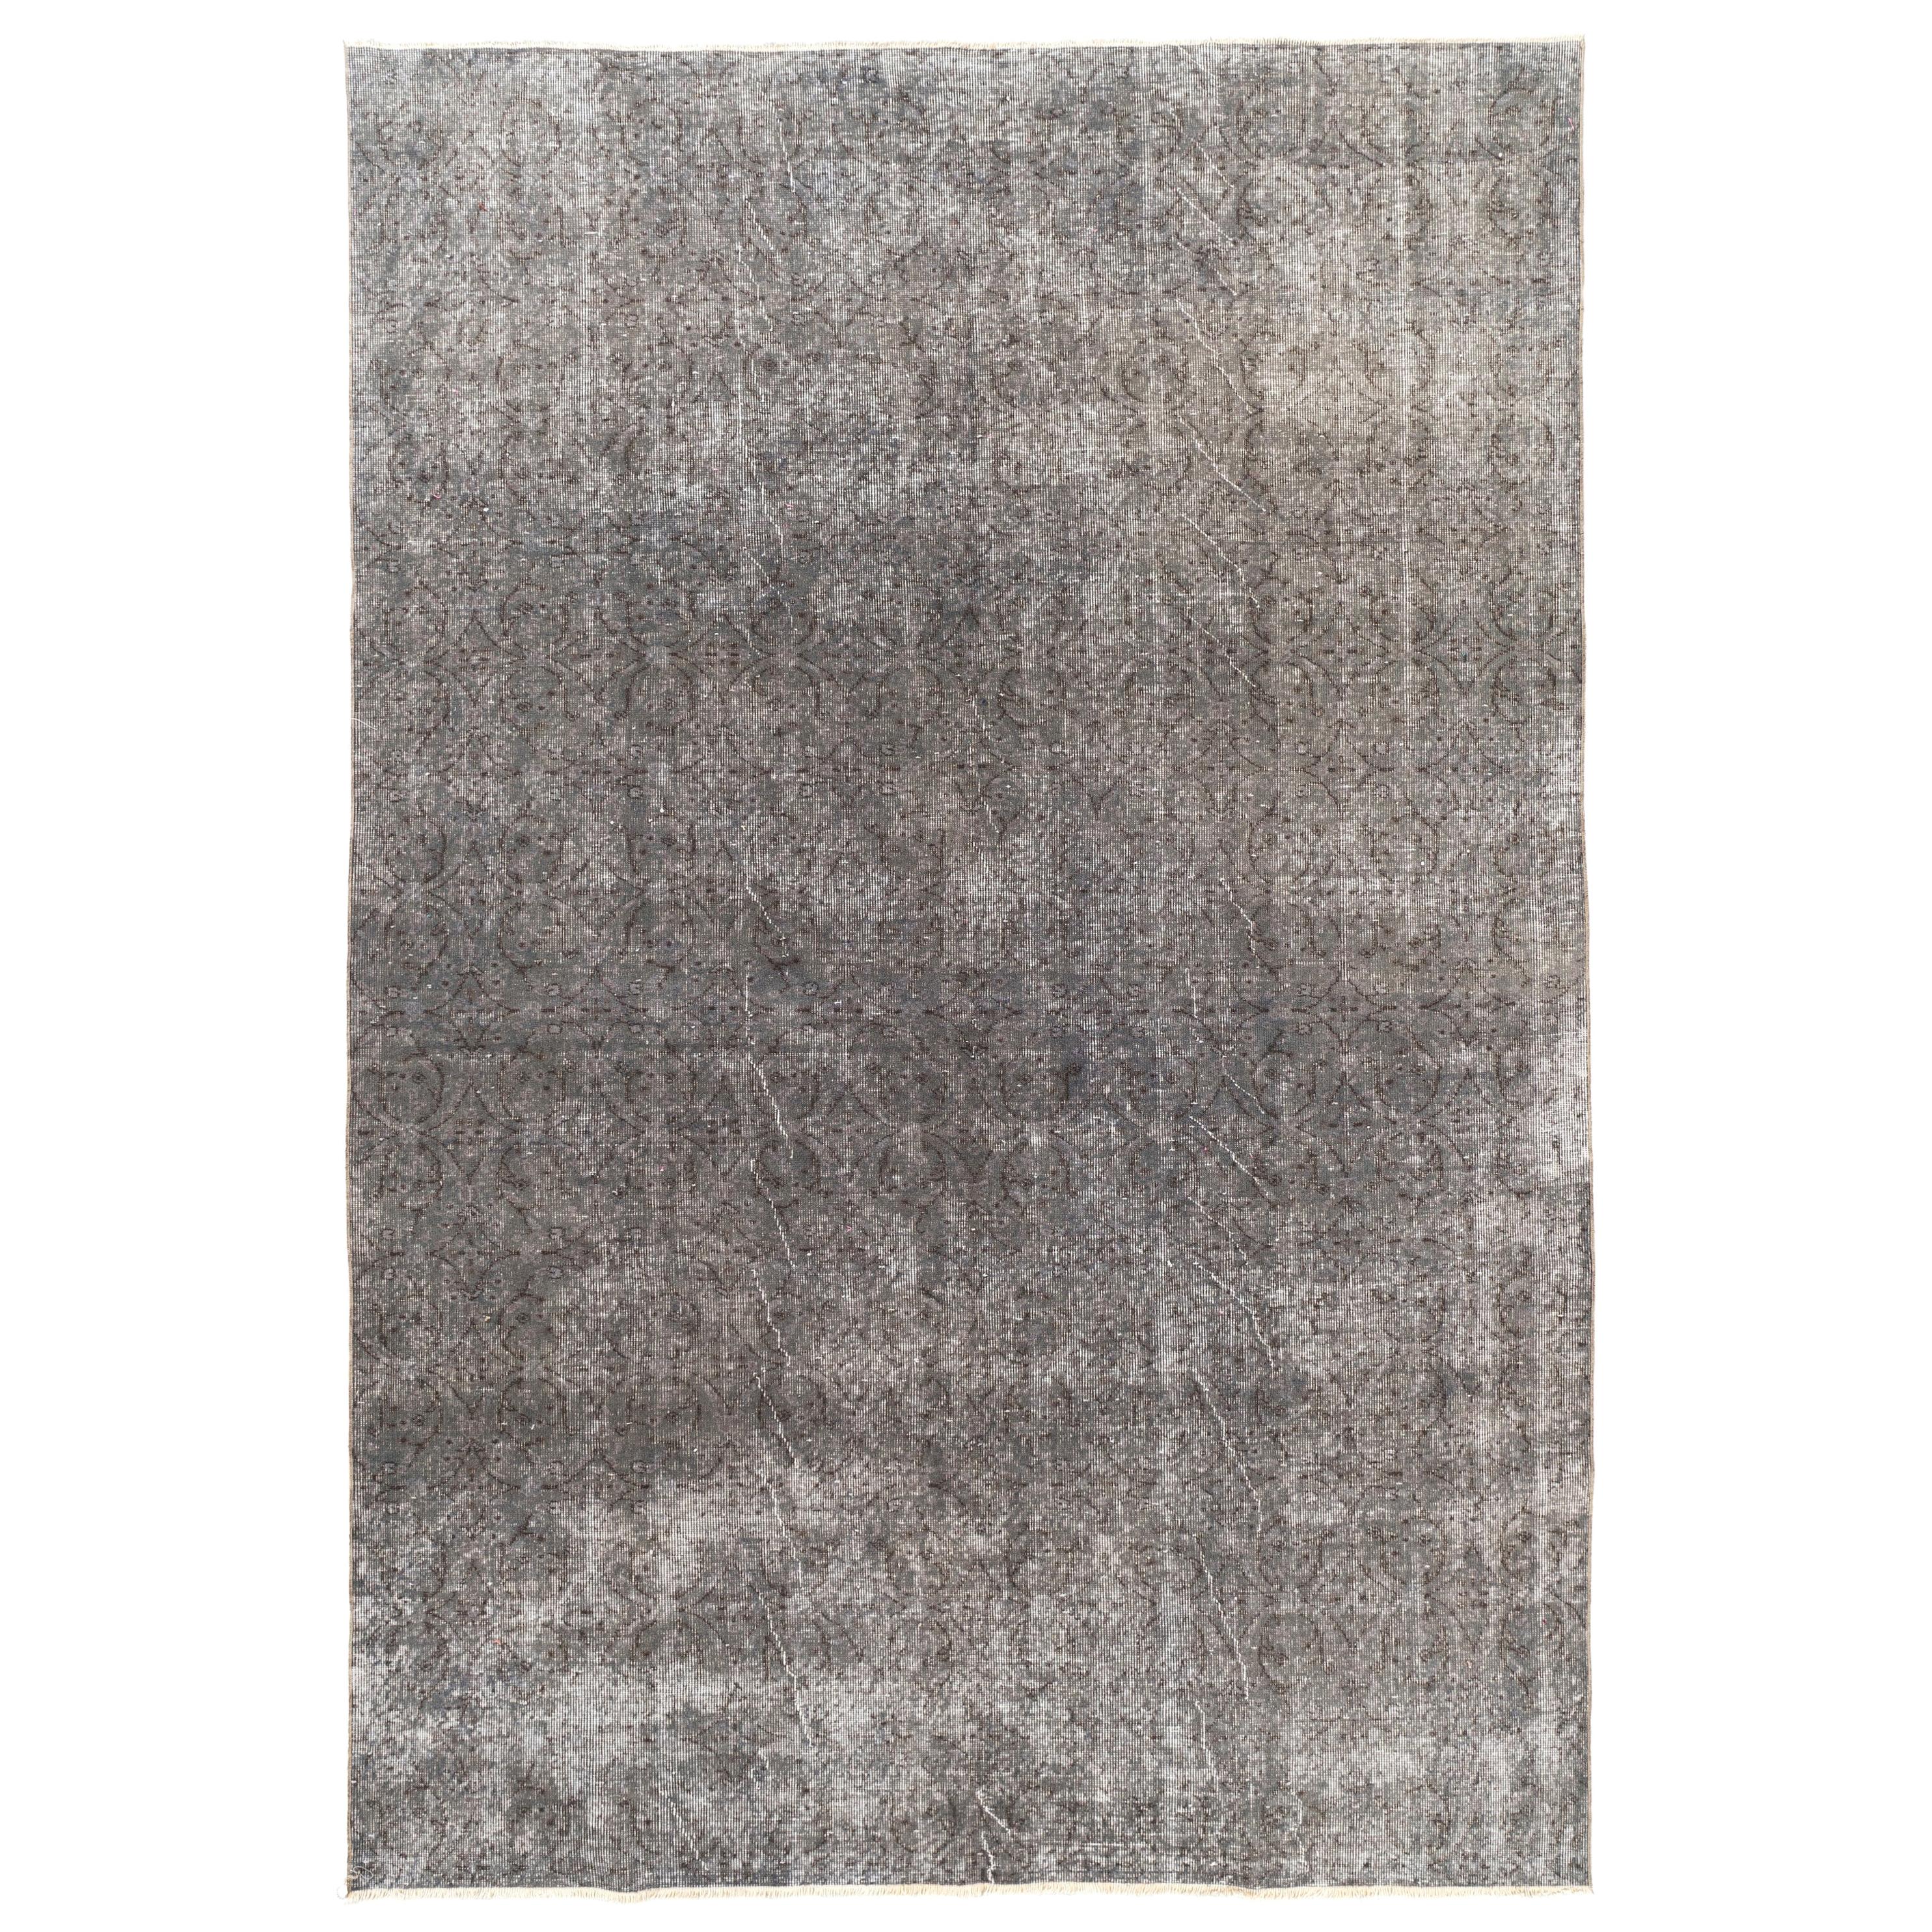 7x10 Ft Turkish Handmade Rug in Gray for Modern Homes, Distressed Vintage Carpet For Sale